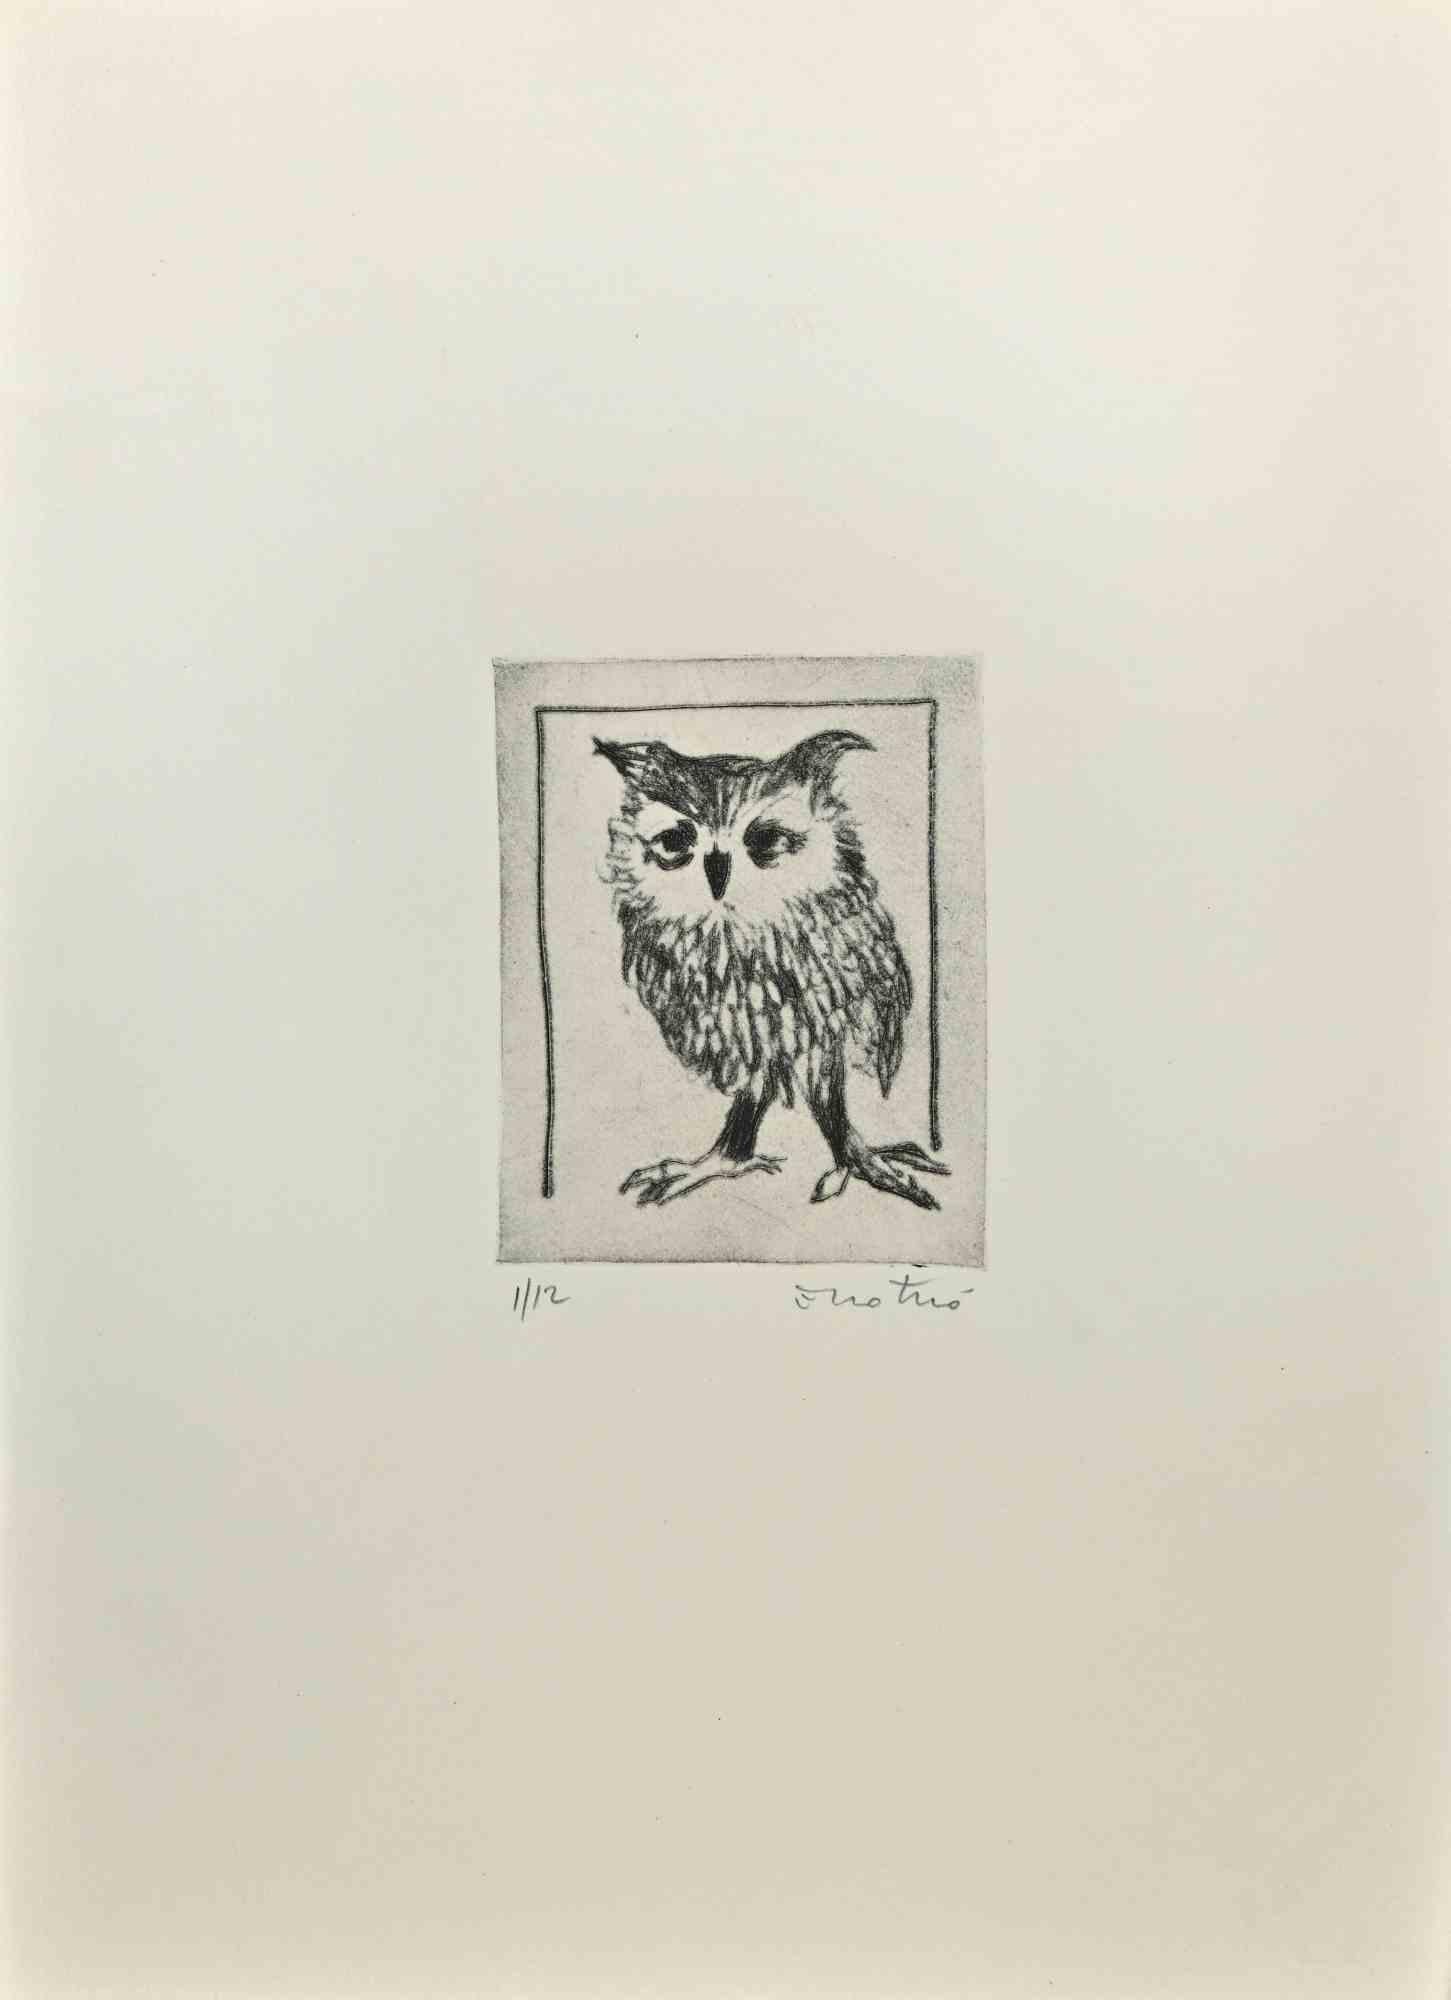 Owl is an Etching realized by Enotrio Pugliese in 1963.

Limited edition of 12 copies numbered and signed by the artist.

Good condition on a white cardboard.

Enotrio Pugliese (May 11, 1920 - August 1989) was an Italian painter. Born in Buenos